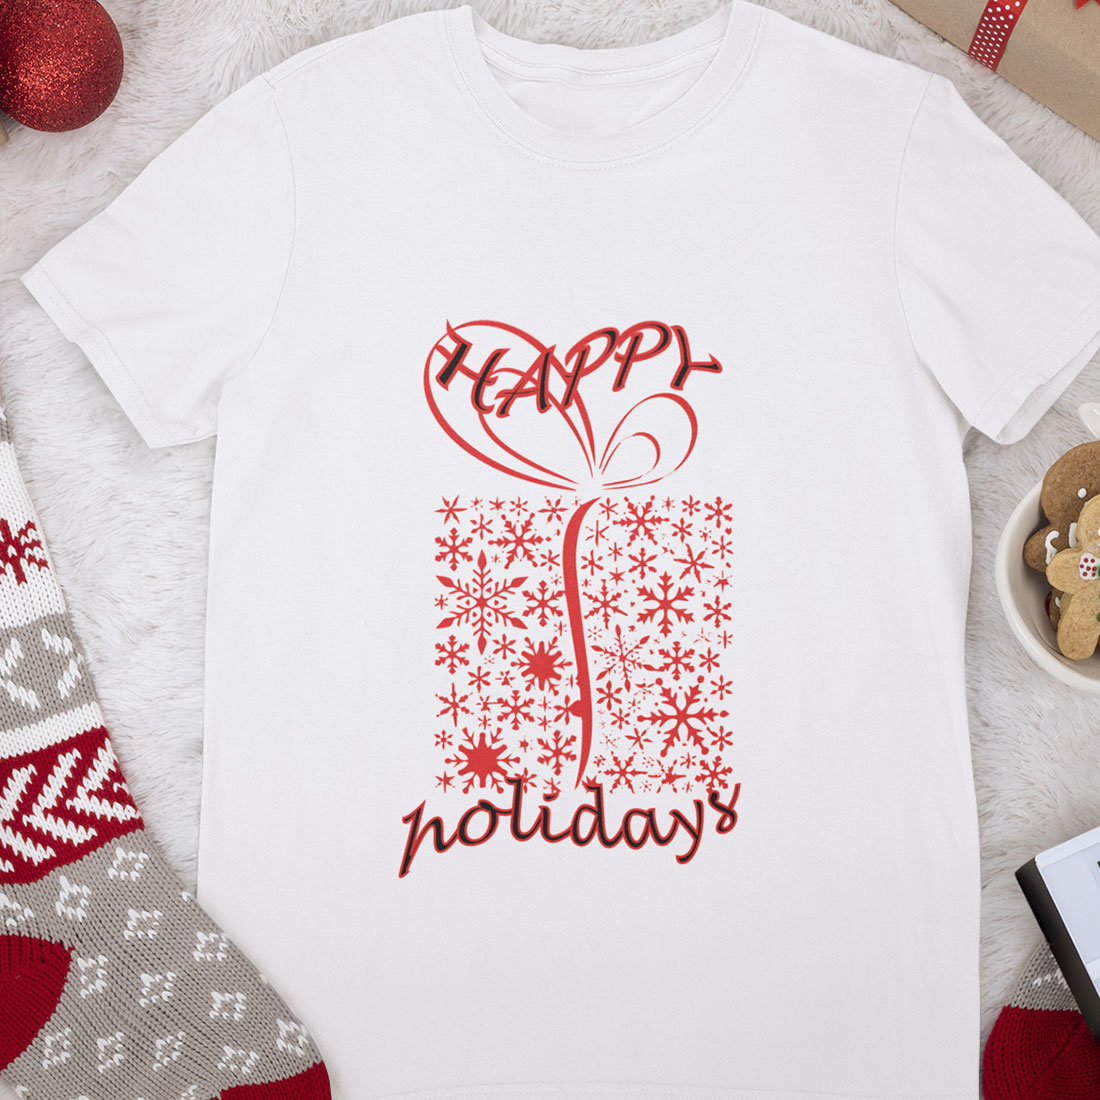 White t-shirt with red Christmas embroidery.